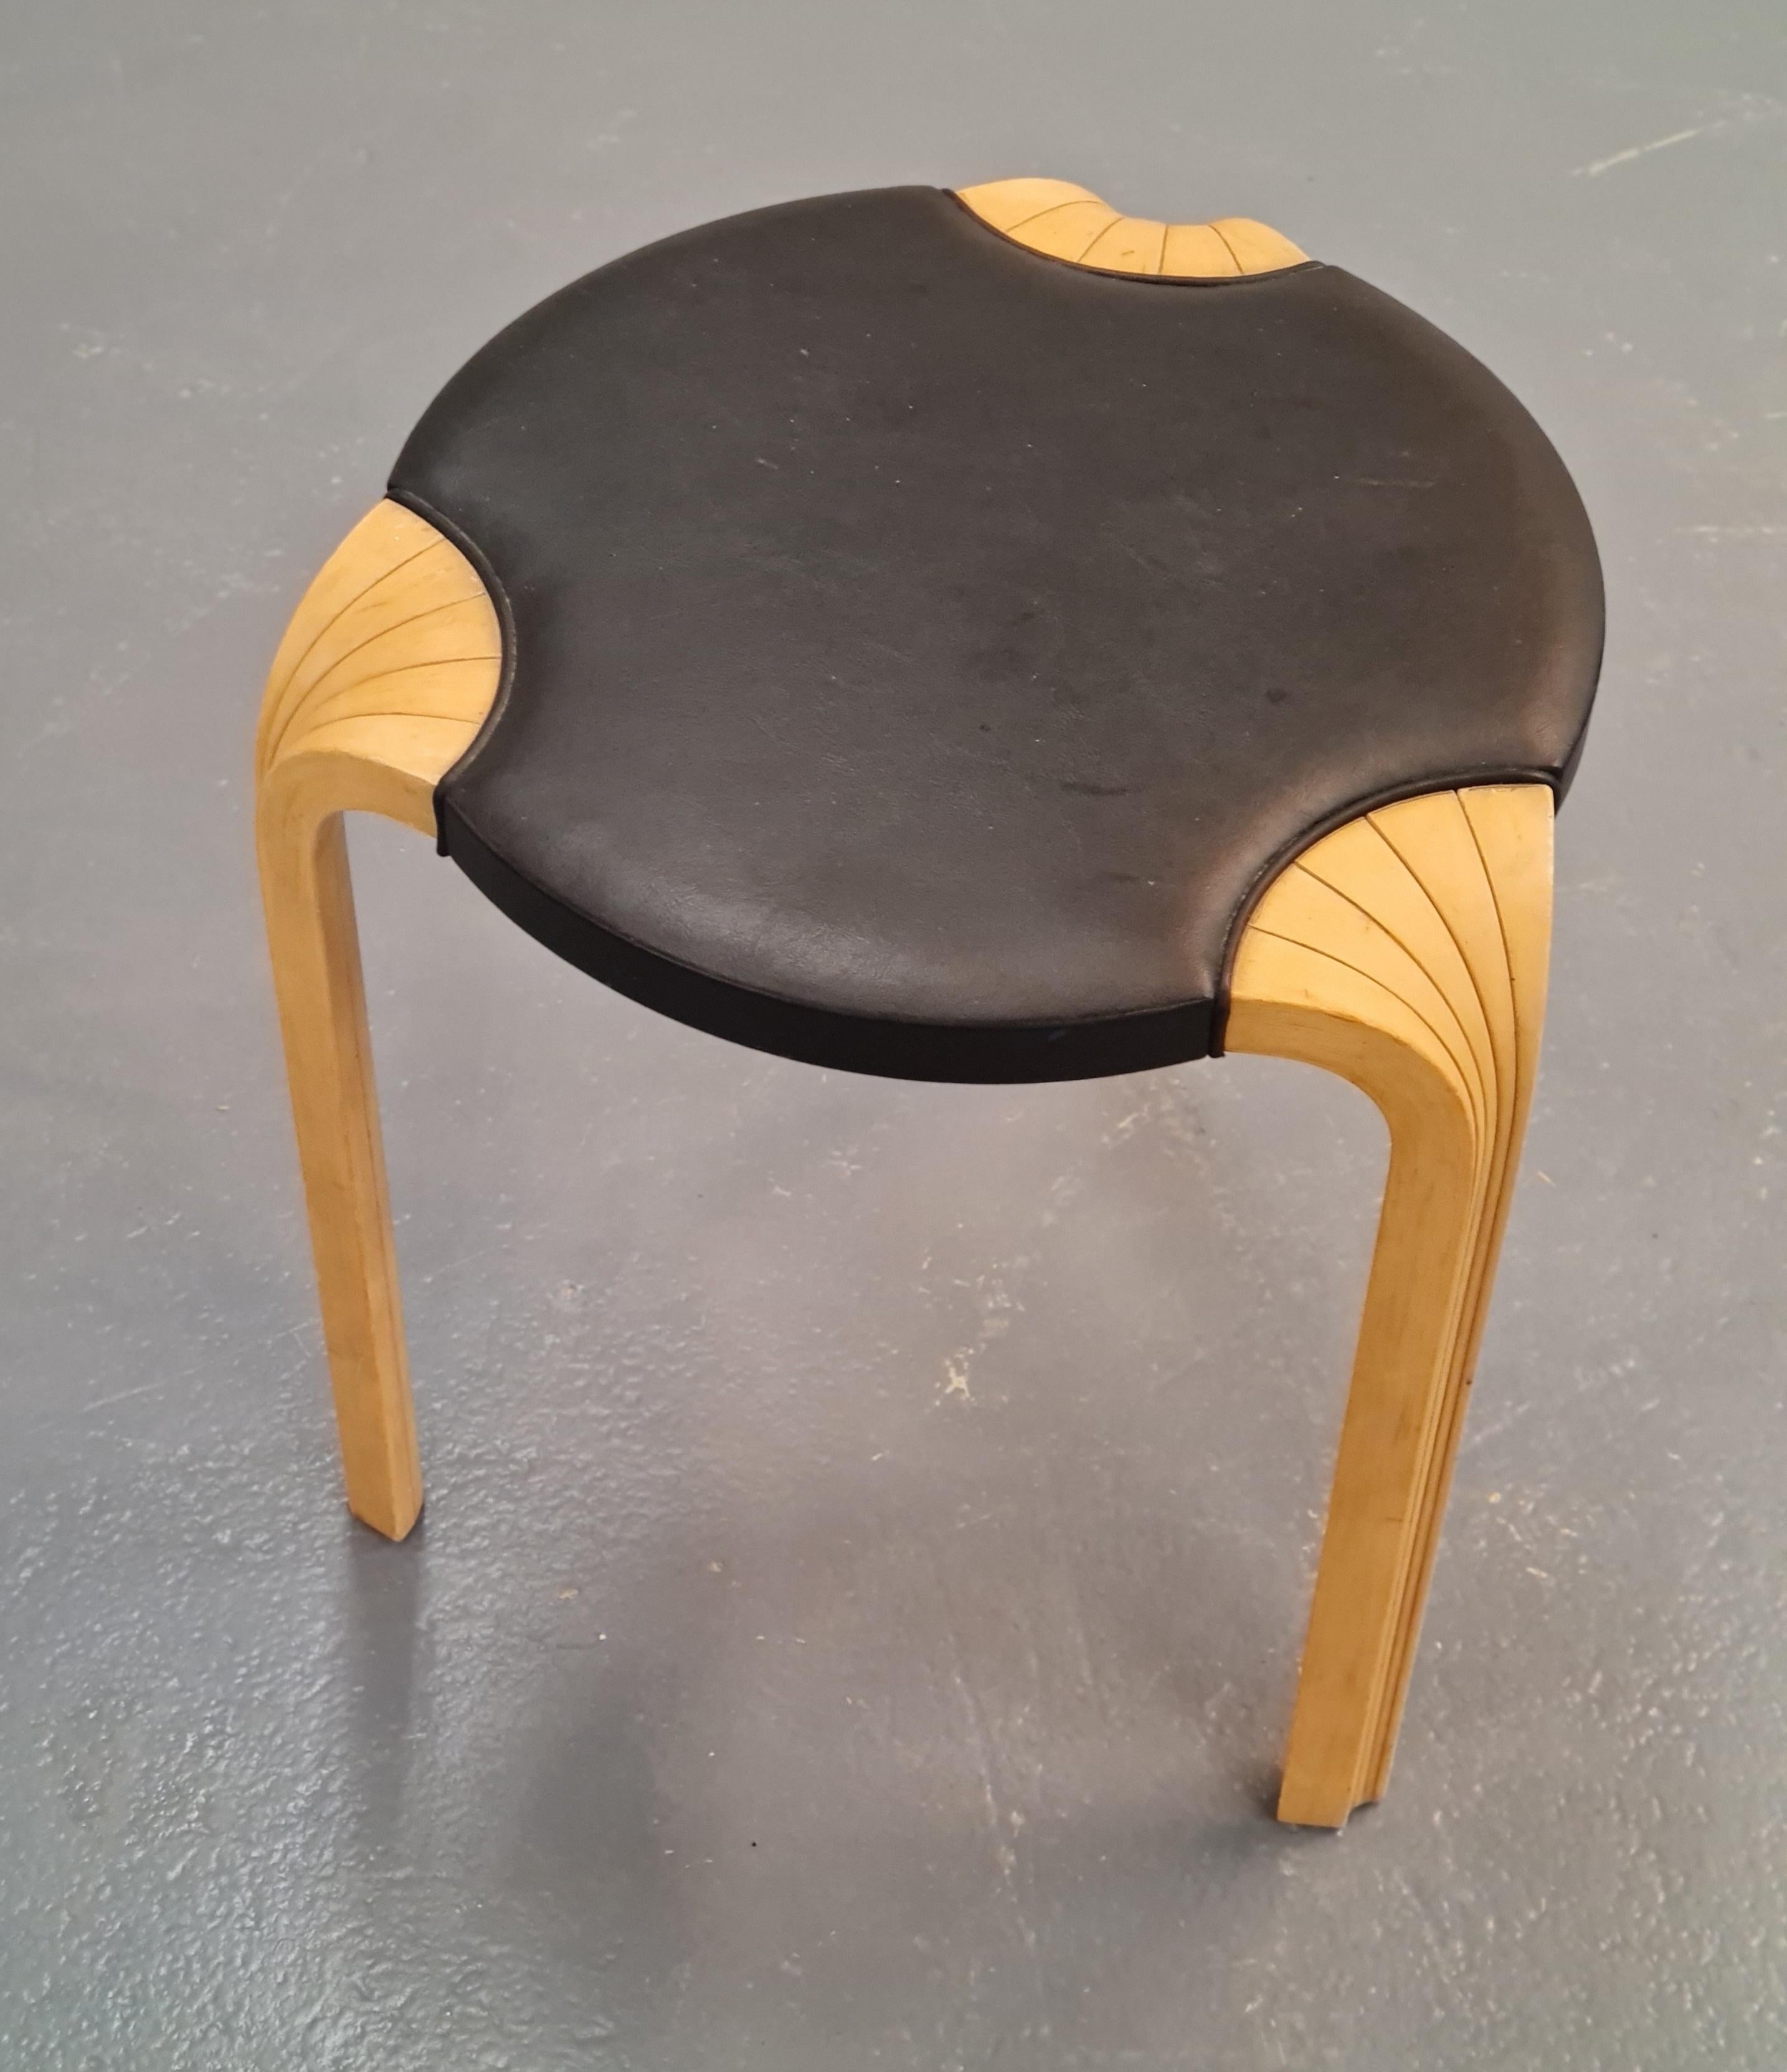 Even though simple, this stool comes with great quality and attention to details. The less common X-leg with the leather padding bring plain beauty. This stool is in good condition with some signs of usage.